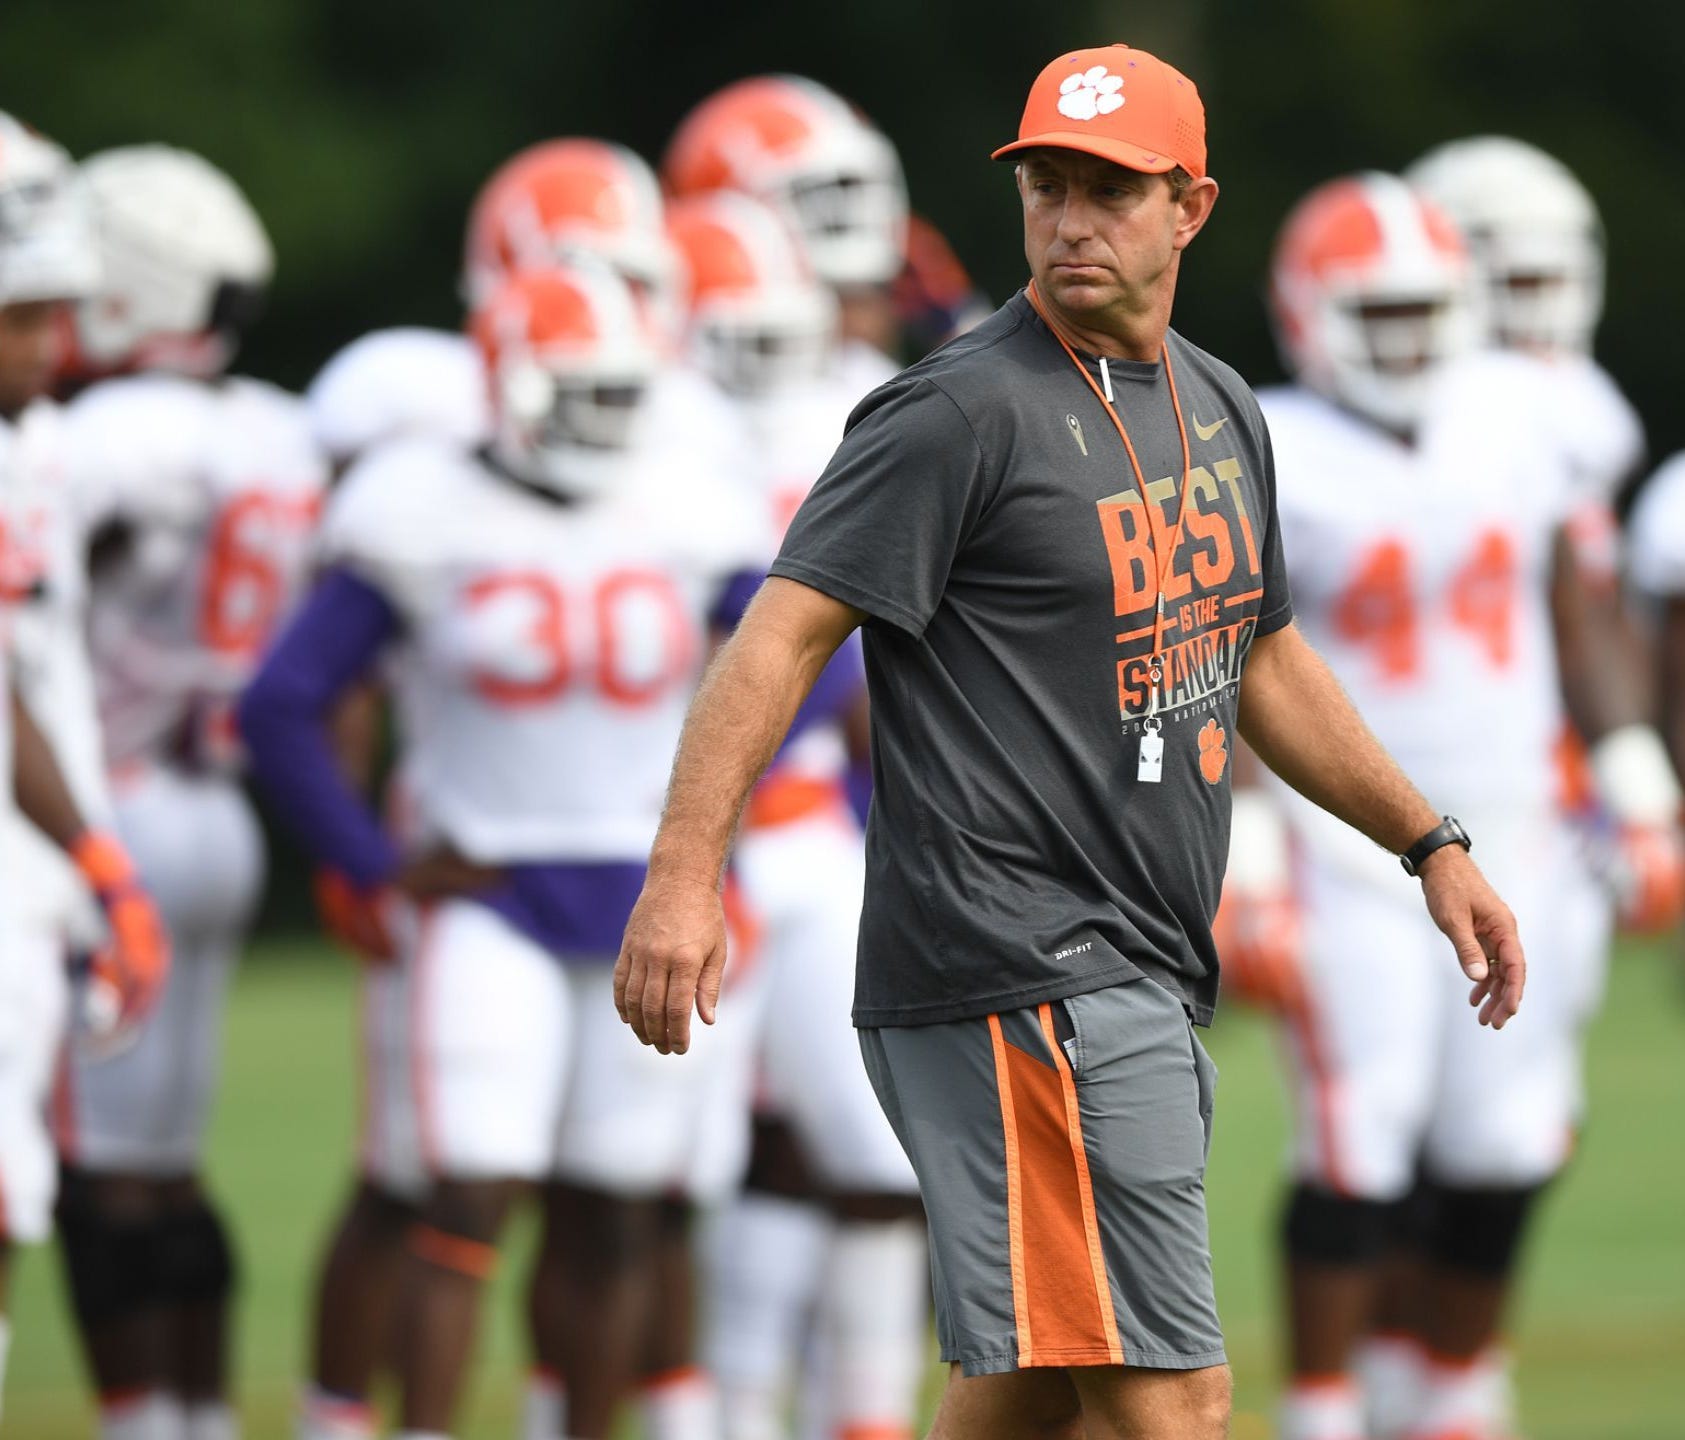 Clemson coach Dabo Swinney has guided the Tigers to 70 wins in the past six seasons.